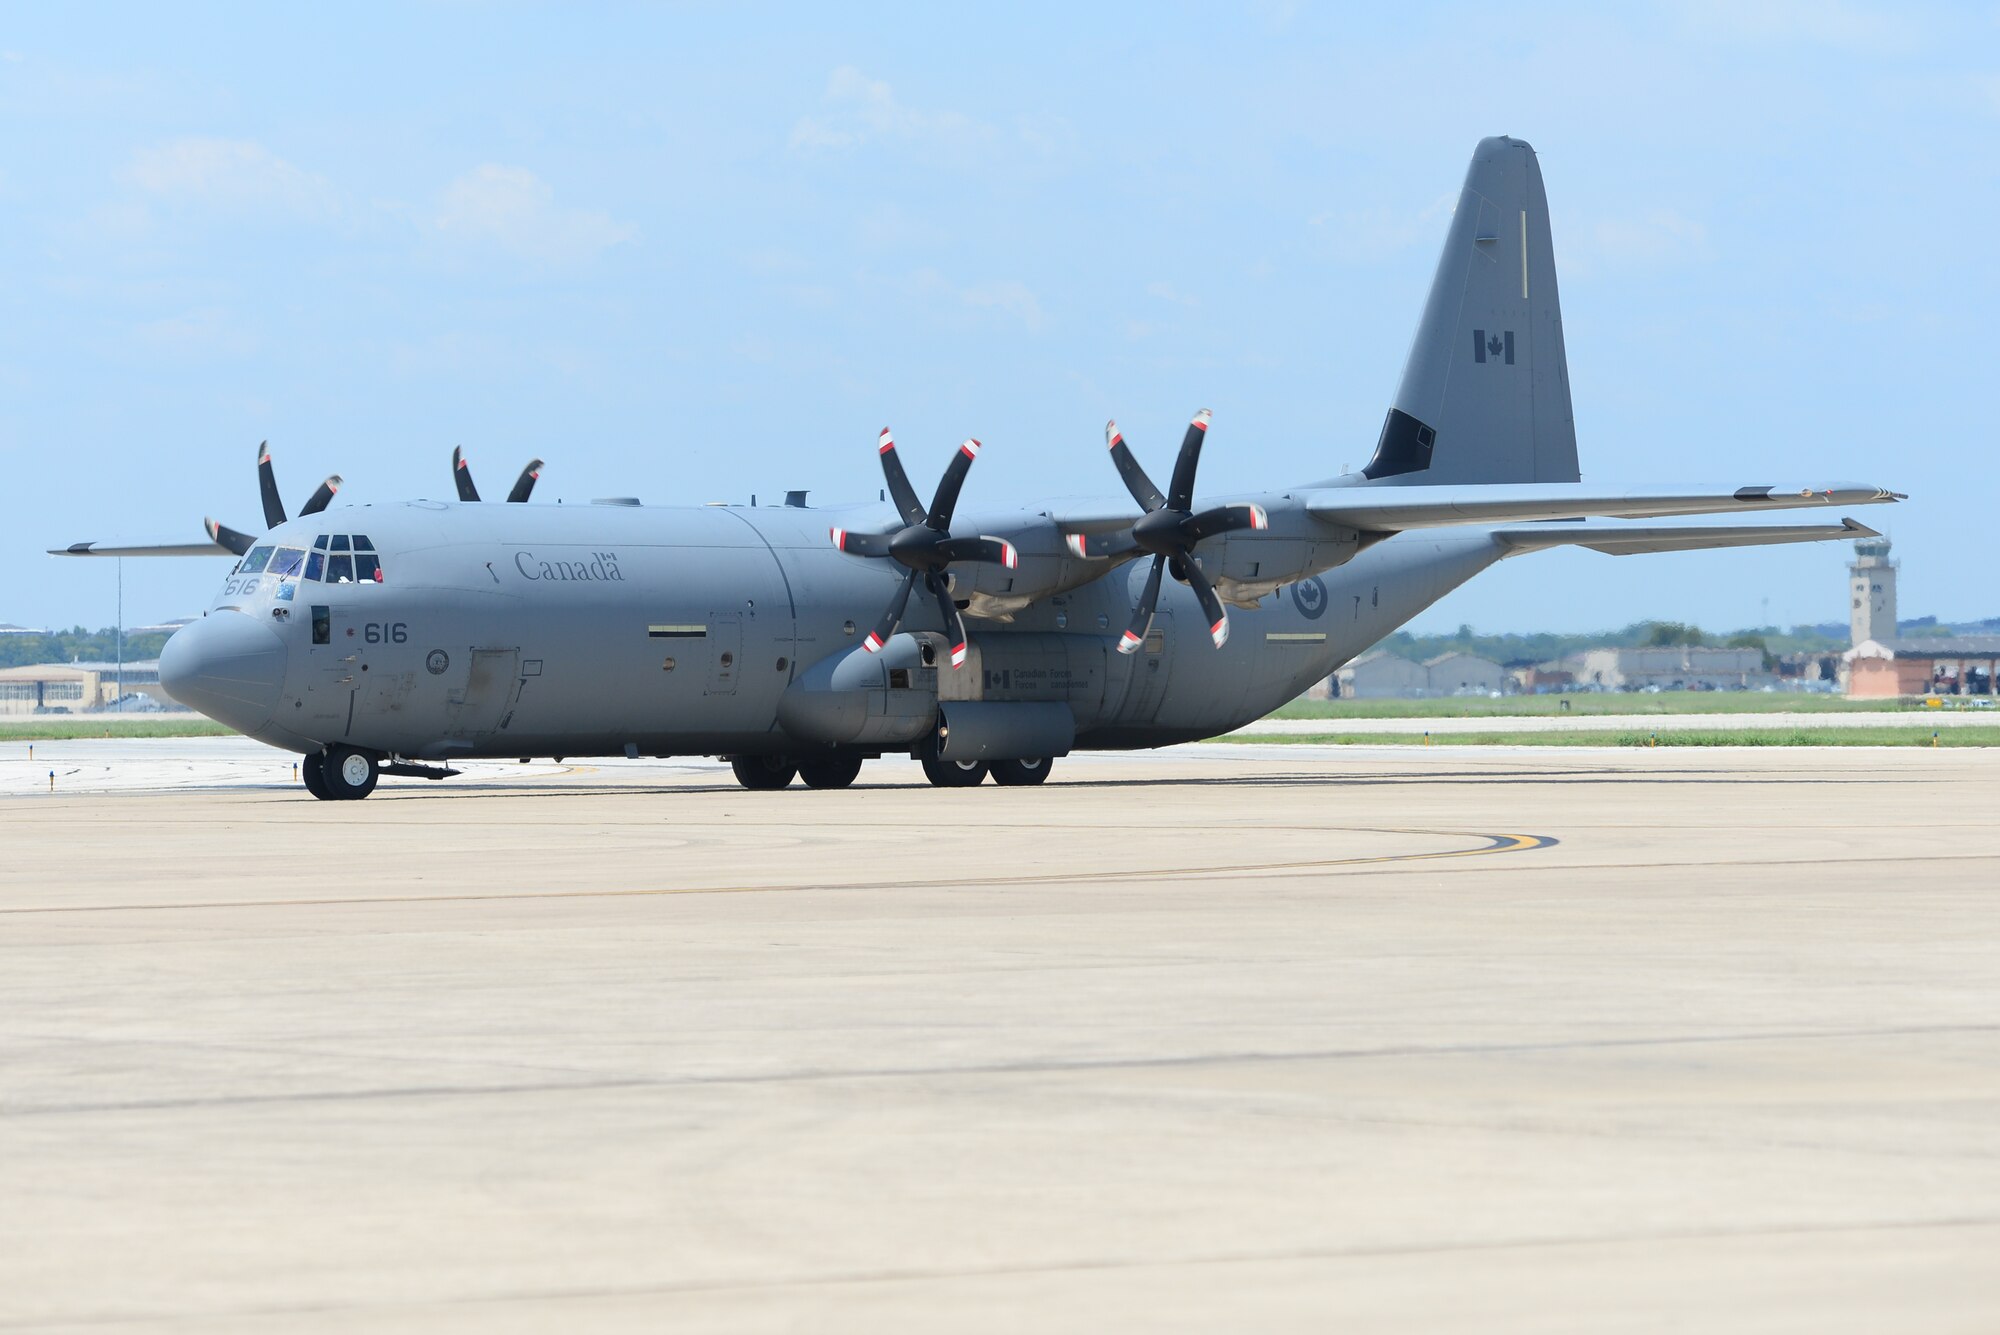 A Royal Canadian Air Force CC-130J Hercules arlift arrives at Joint Base San Antonio-Lackland Kelly Fied, Texas carrying humanitarian supplies from the government of Canada to aid in Hurricane Harvey relief efforts Sept. 3, 2017. The supplies included pediatric necessities like baby formula, blankets, cribs and other similar items. The RCAF airlift flew in from 8 Wing Trenton, Ontario, Canada.